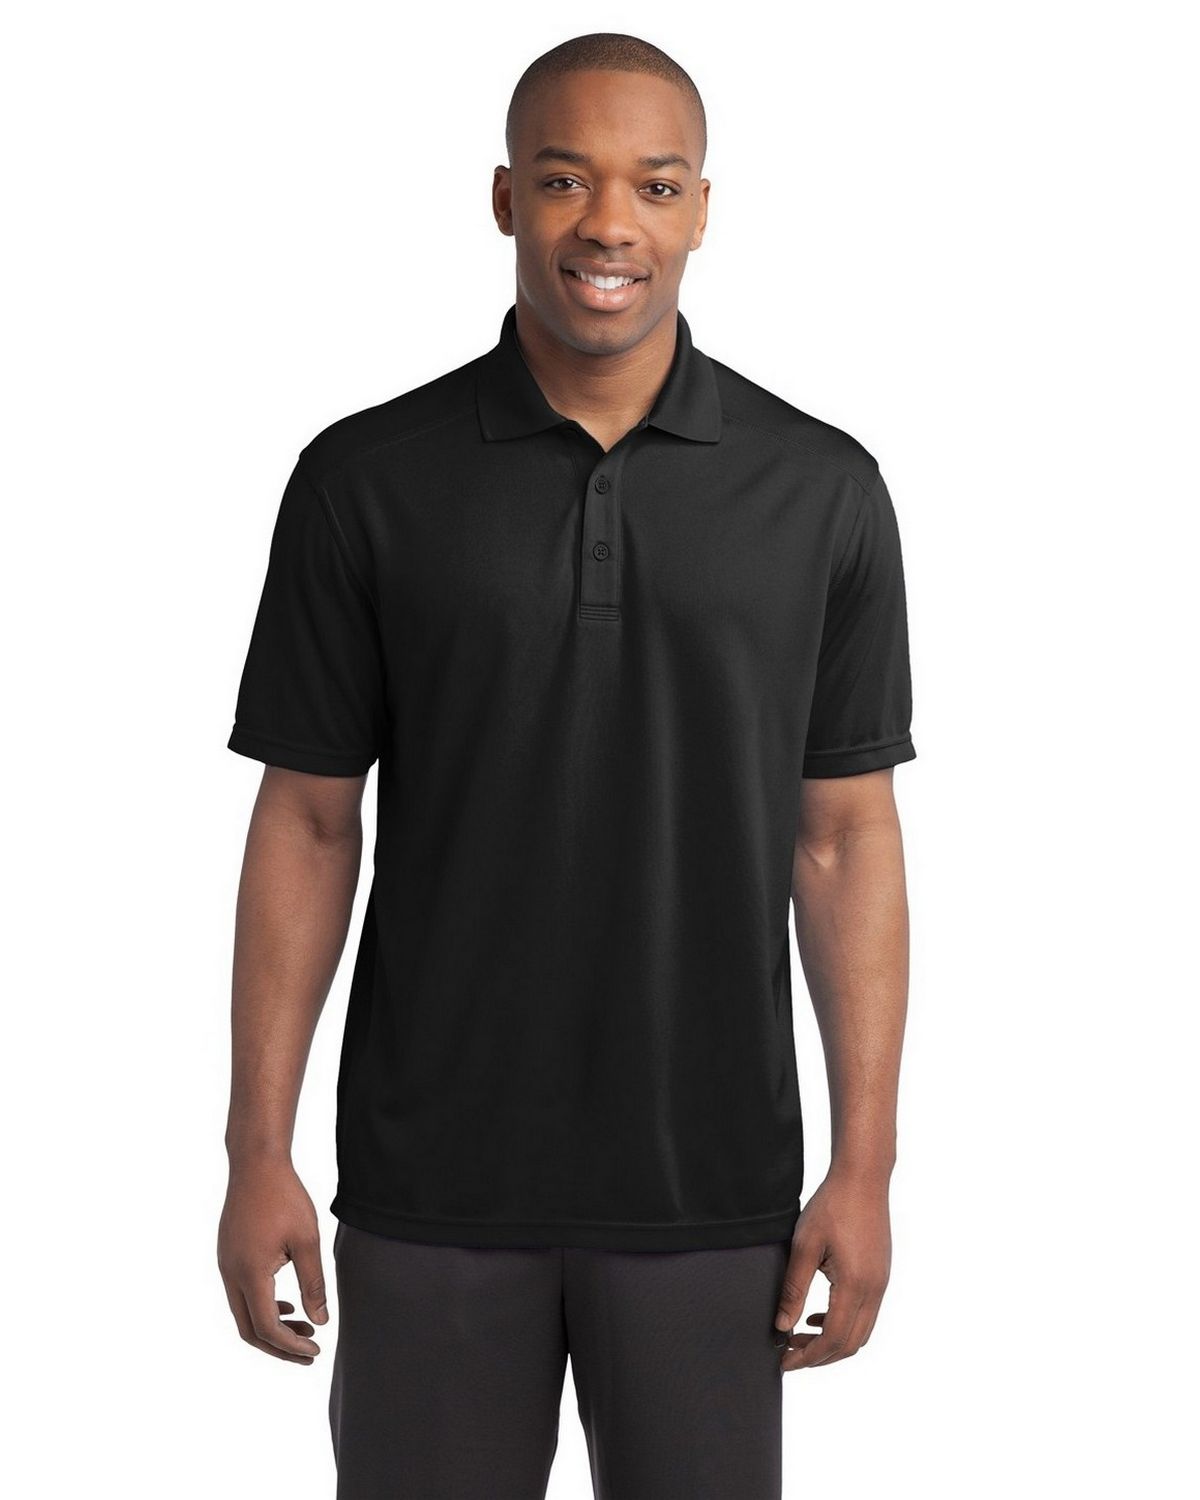 Size Chart for Sport-Tek ST680 PosiCharge Micro-Mesh Polo by Port Authority